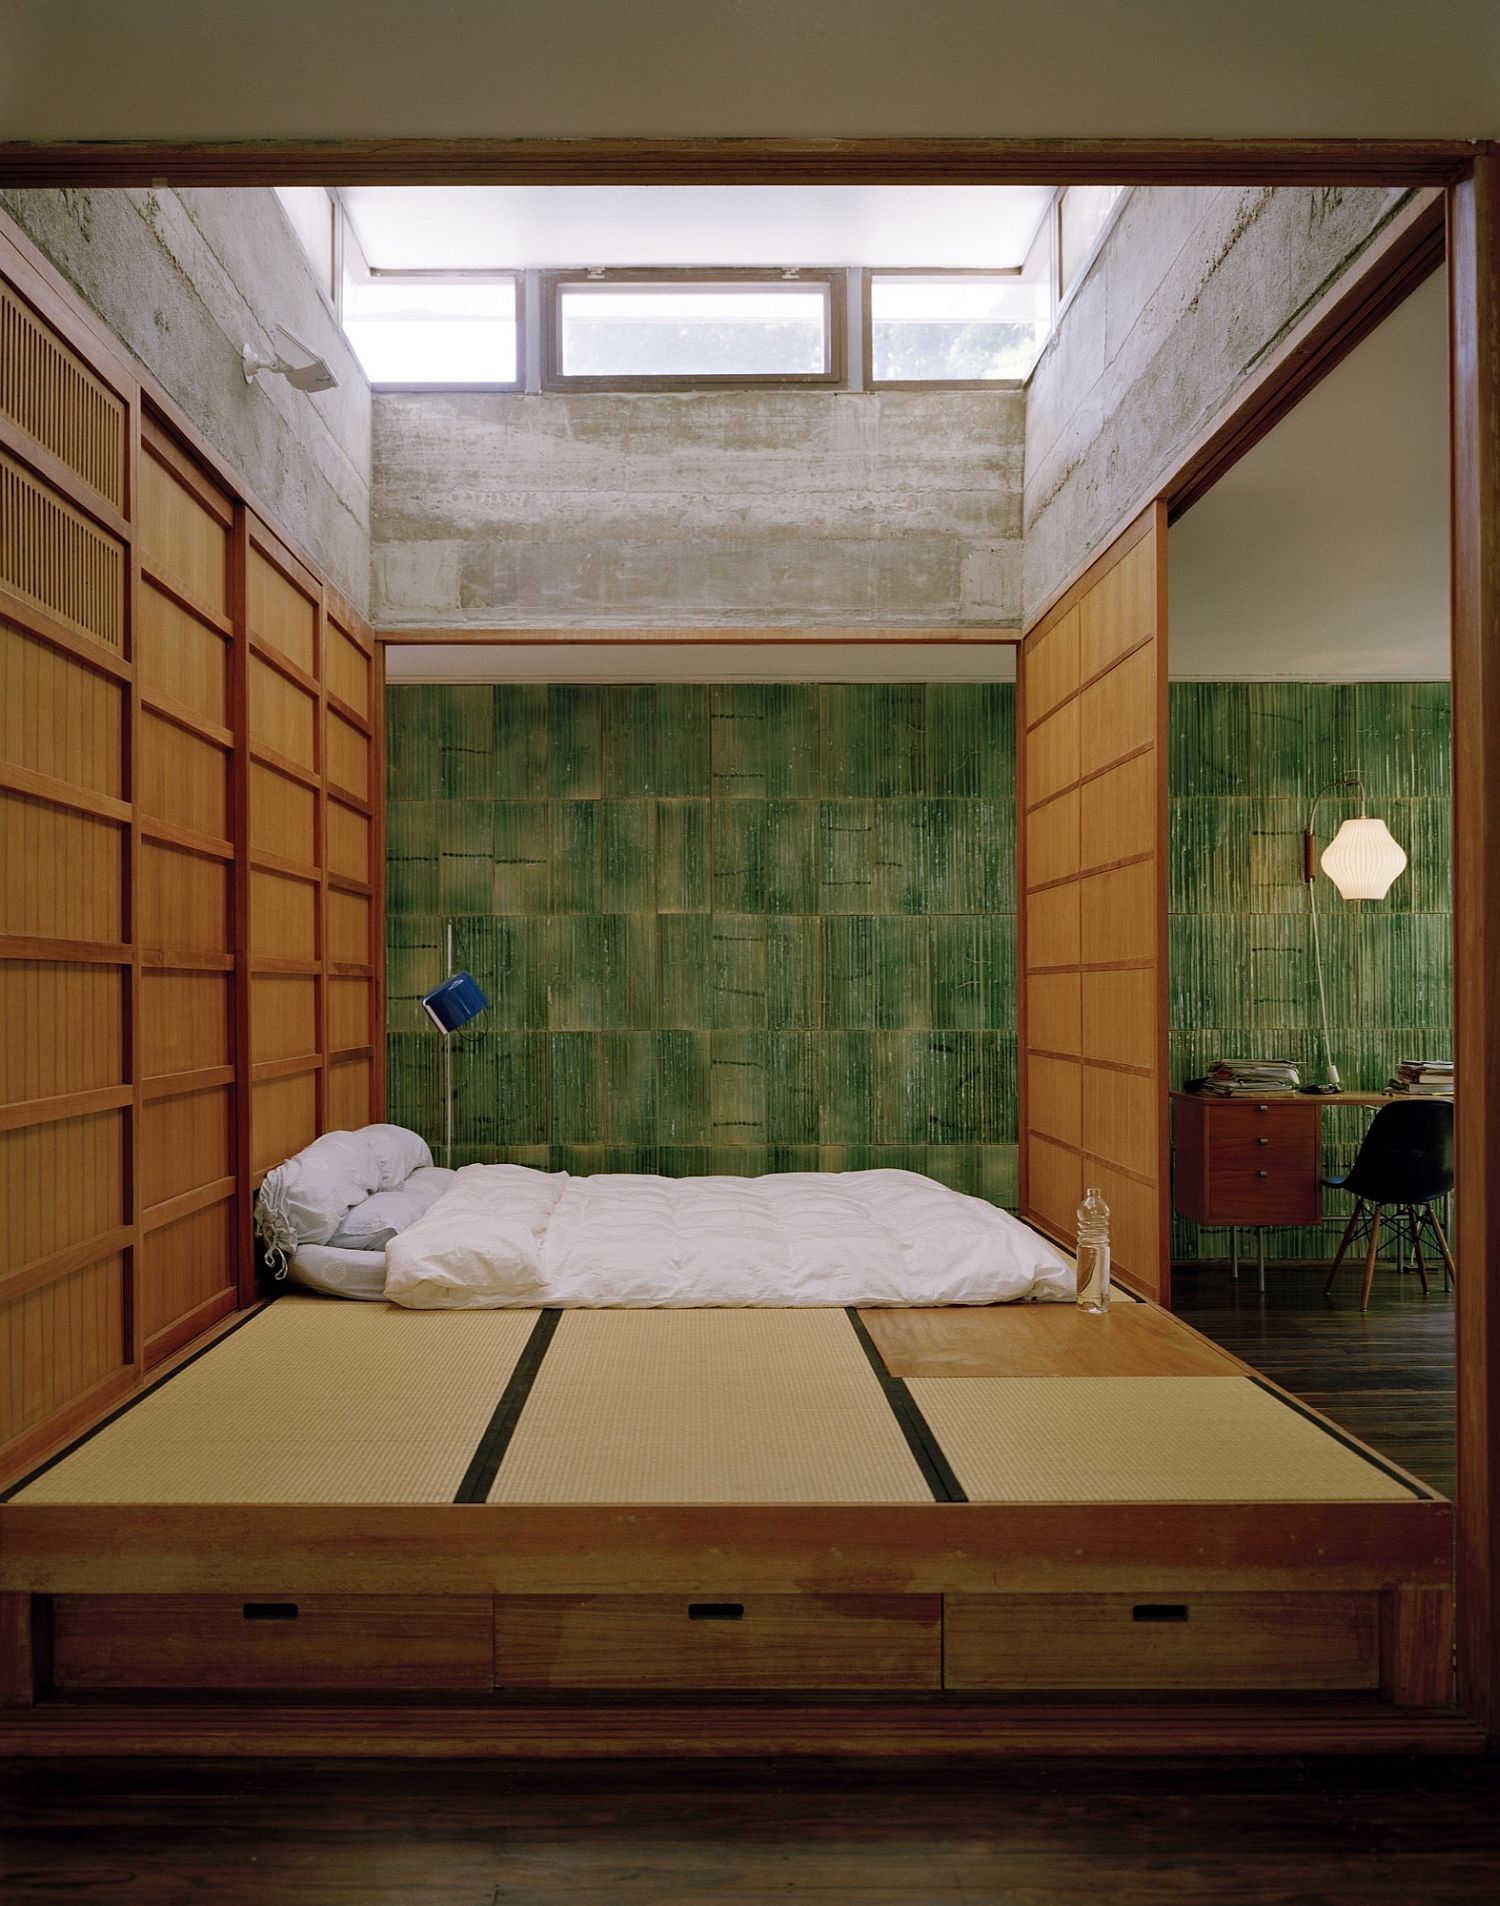 Minimal Asian style bedroom with green walls and a woodsy platform bed